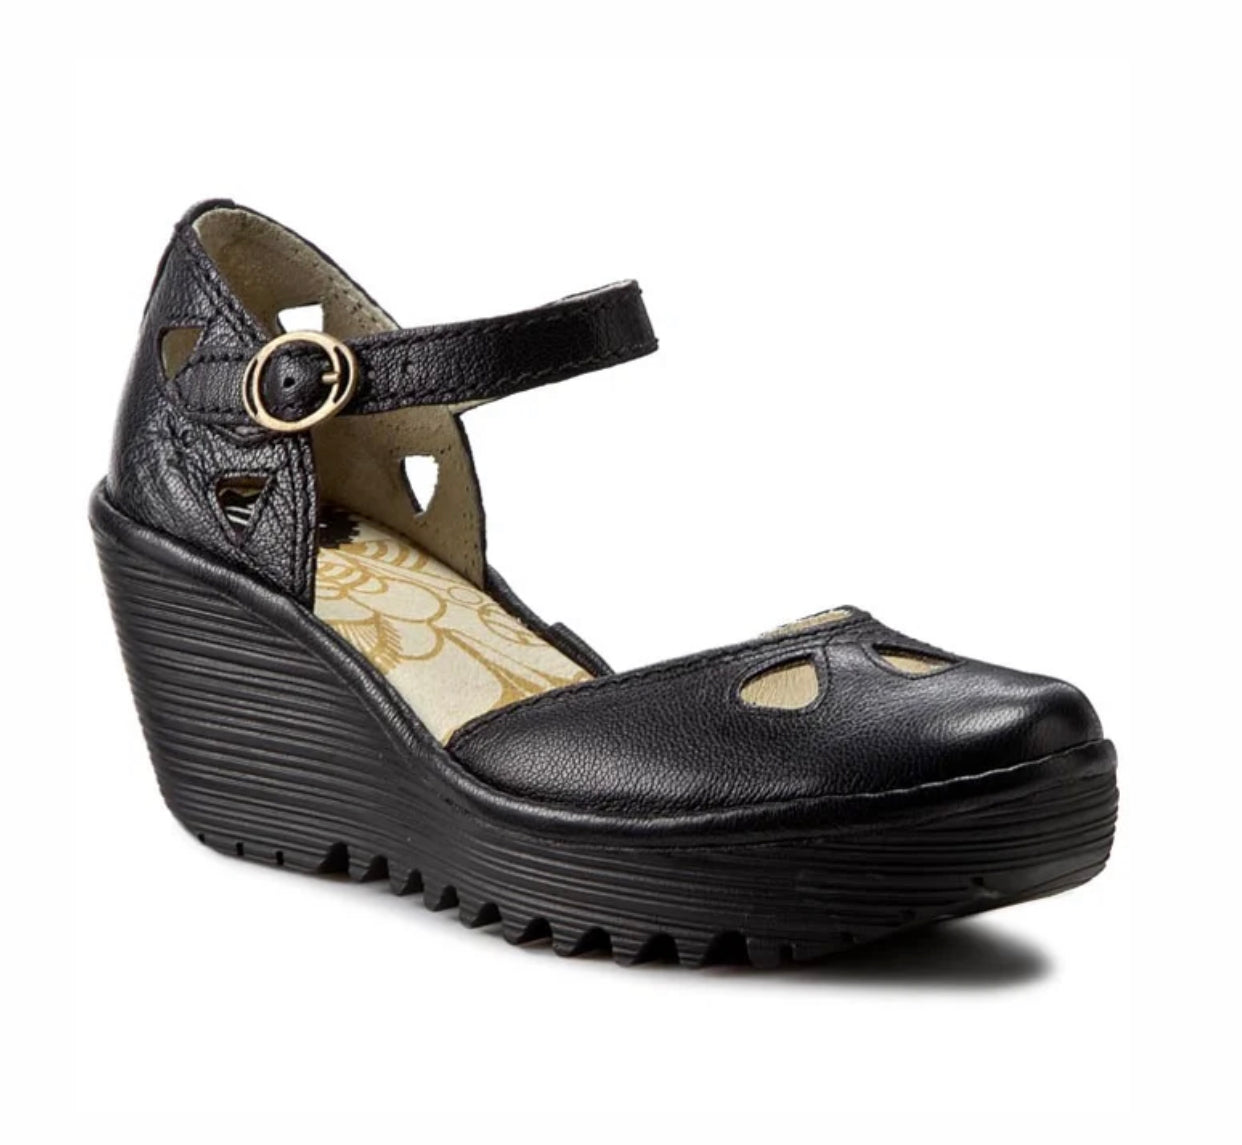 Fly London Yuna Black Mousse Leather Buckle Wedges Made In Portugal